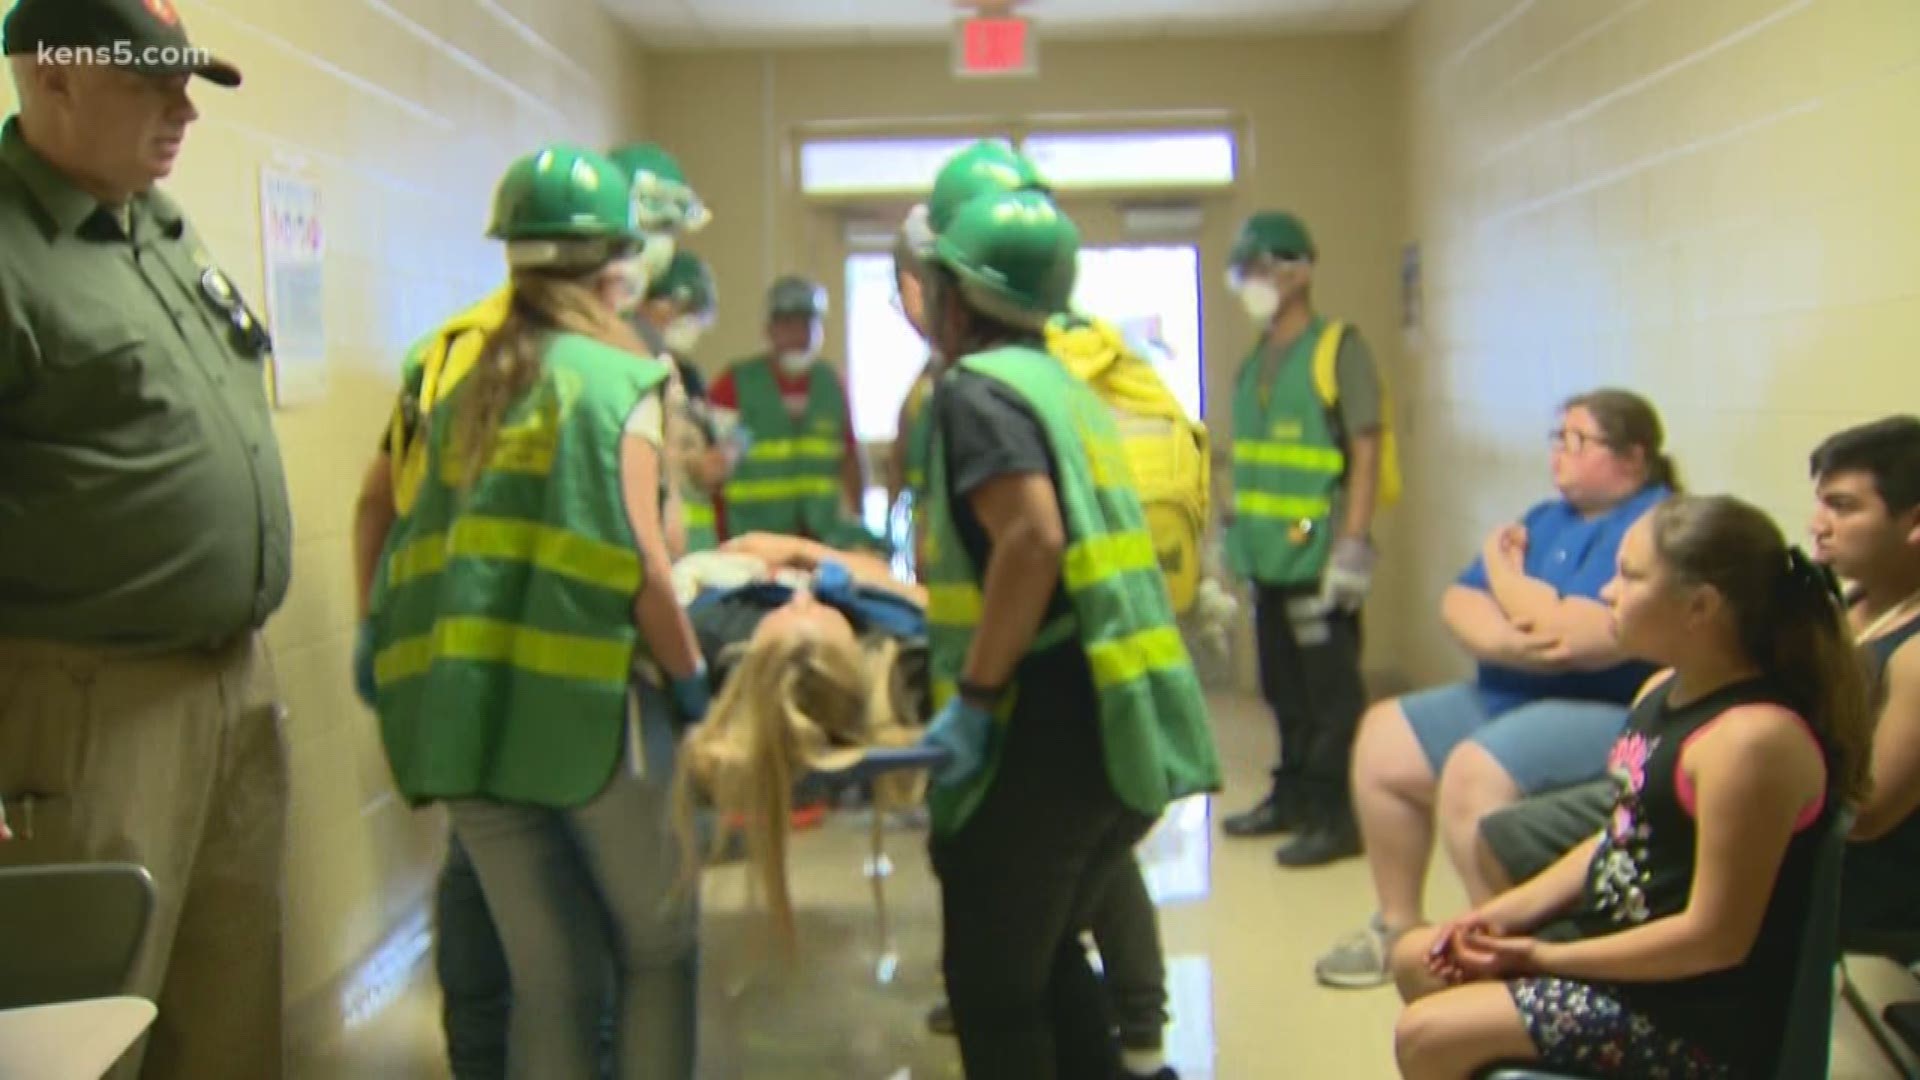 What happens if a natural disaster hits a school? Students at Southside High School found out today by participating in a "mock disaster" drill on campus to help future first responders know what to do in a worst-case scenario. Eyewitness news photojourna